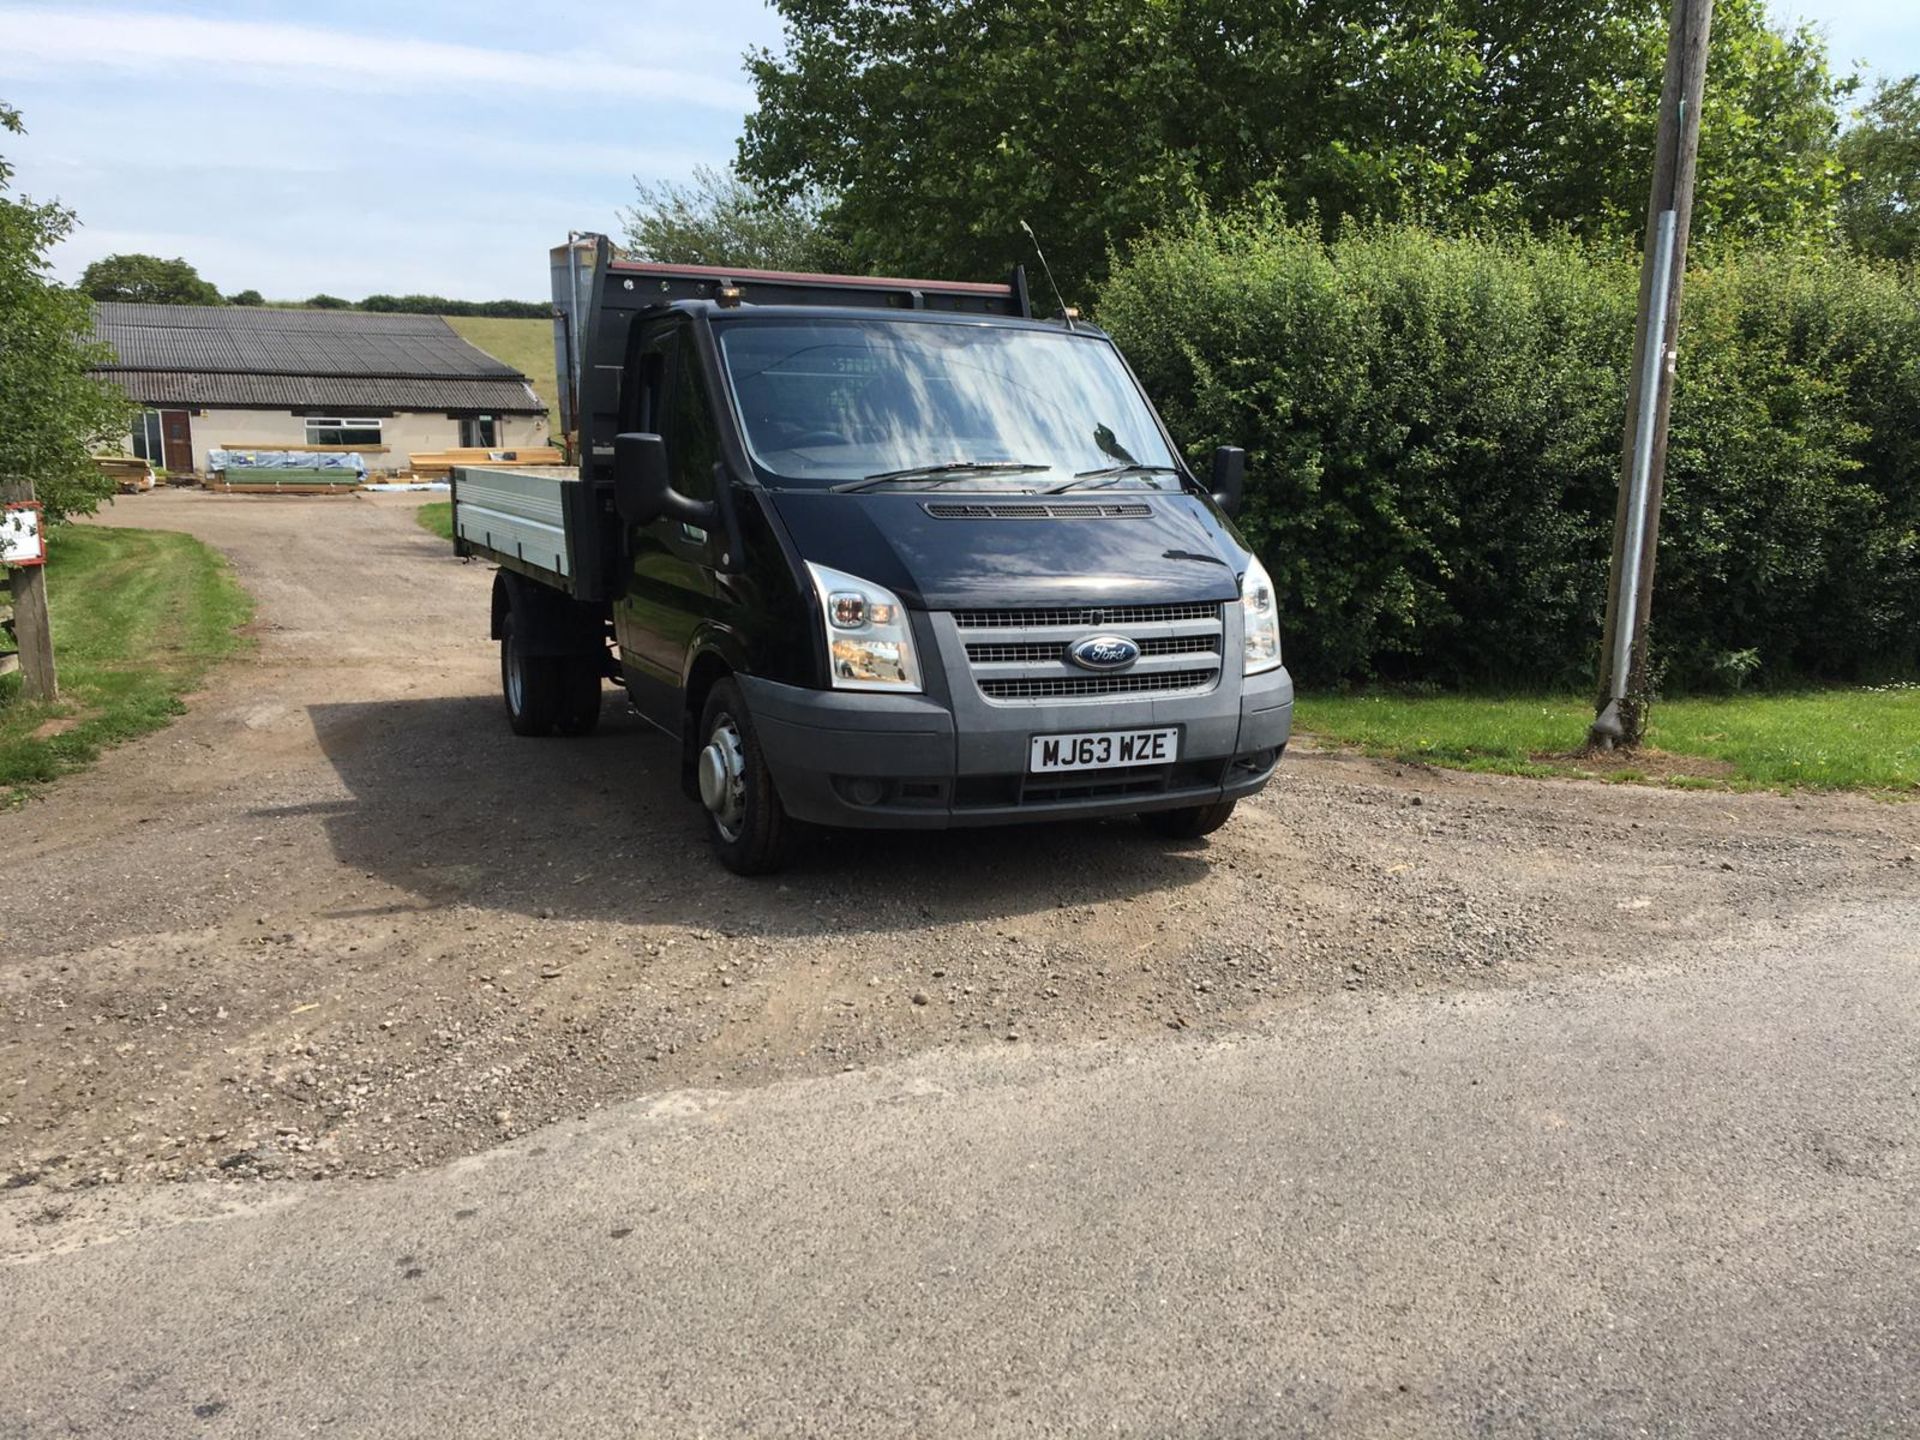 2013/63 REG FORD TRANSIT 100 T350 RWD 2.2 DIESEL DROPSIDE LORRY TIPPER, SHOWING 0 FORMER KEEPERS - Image 2 of 10